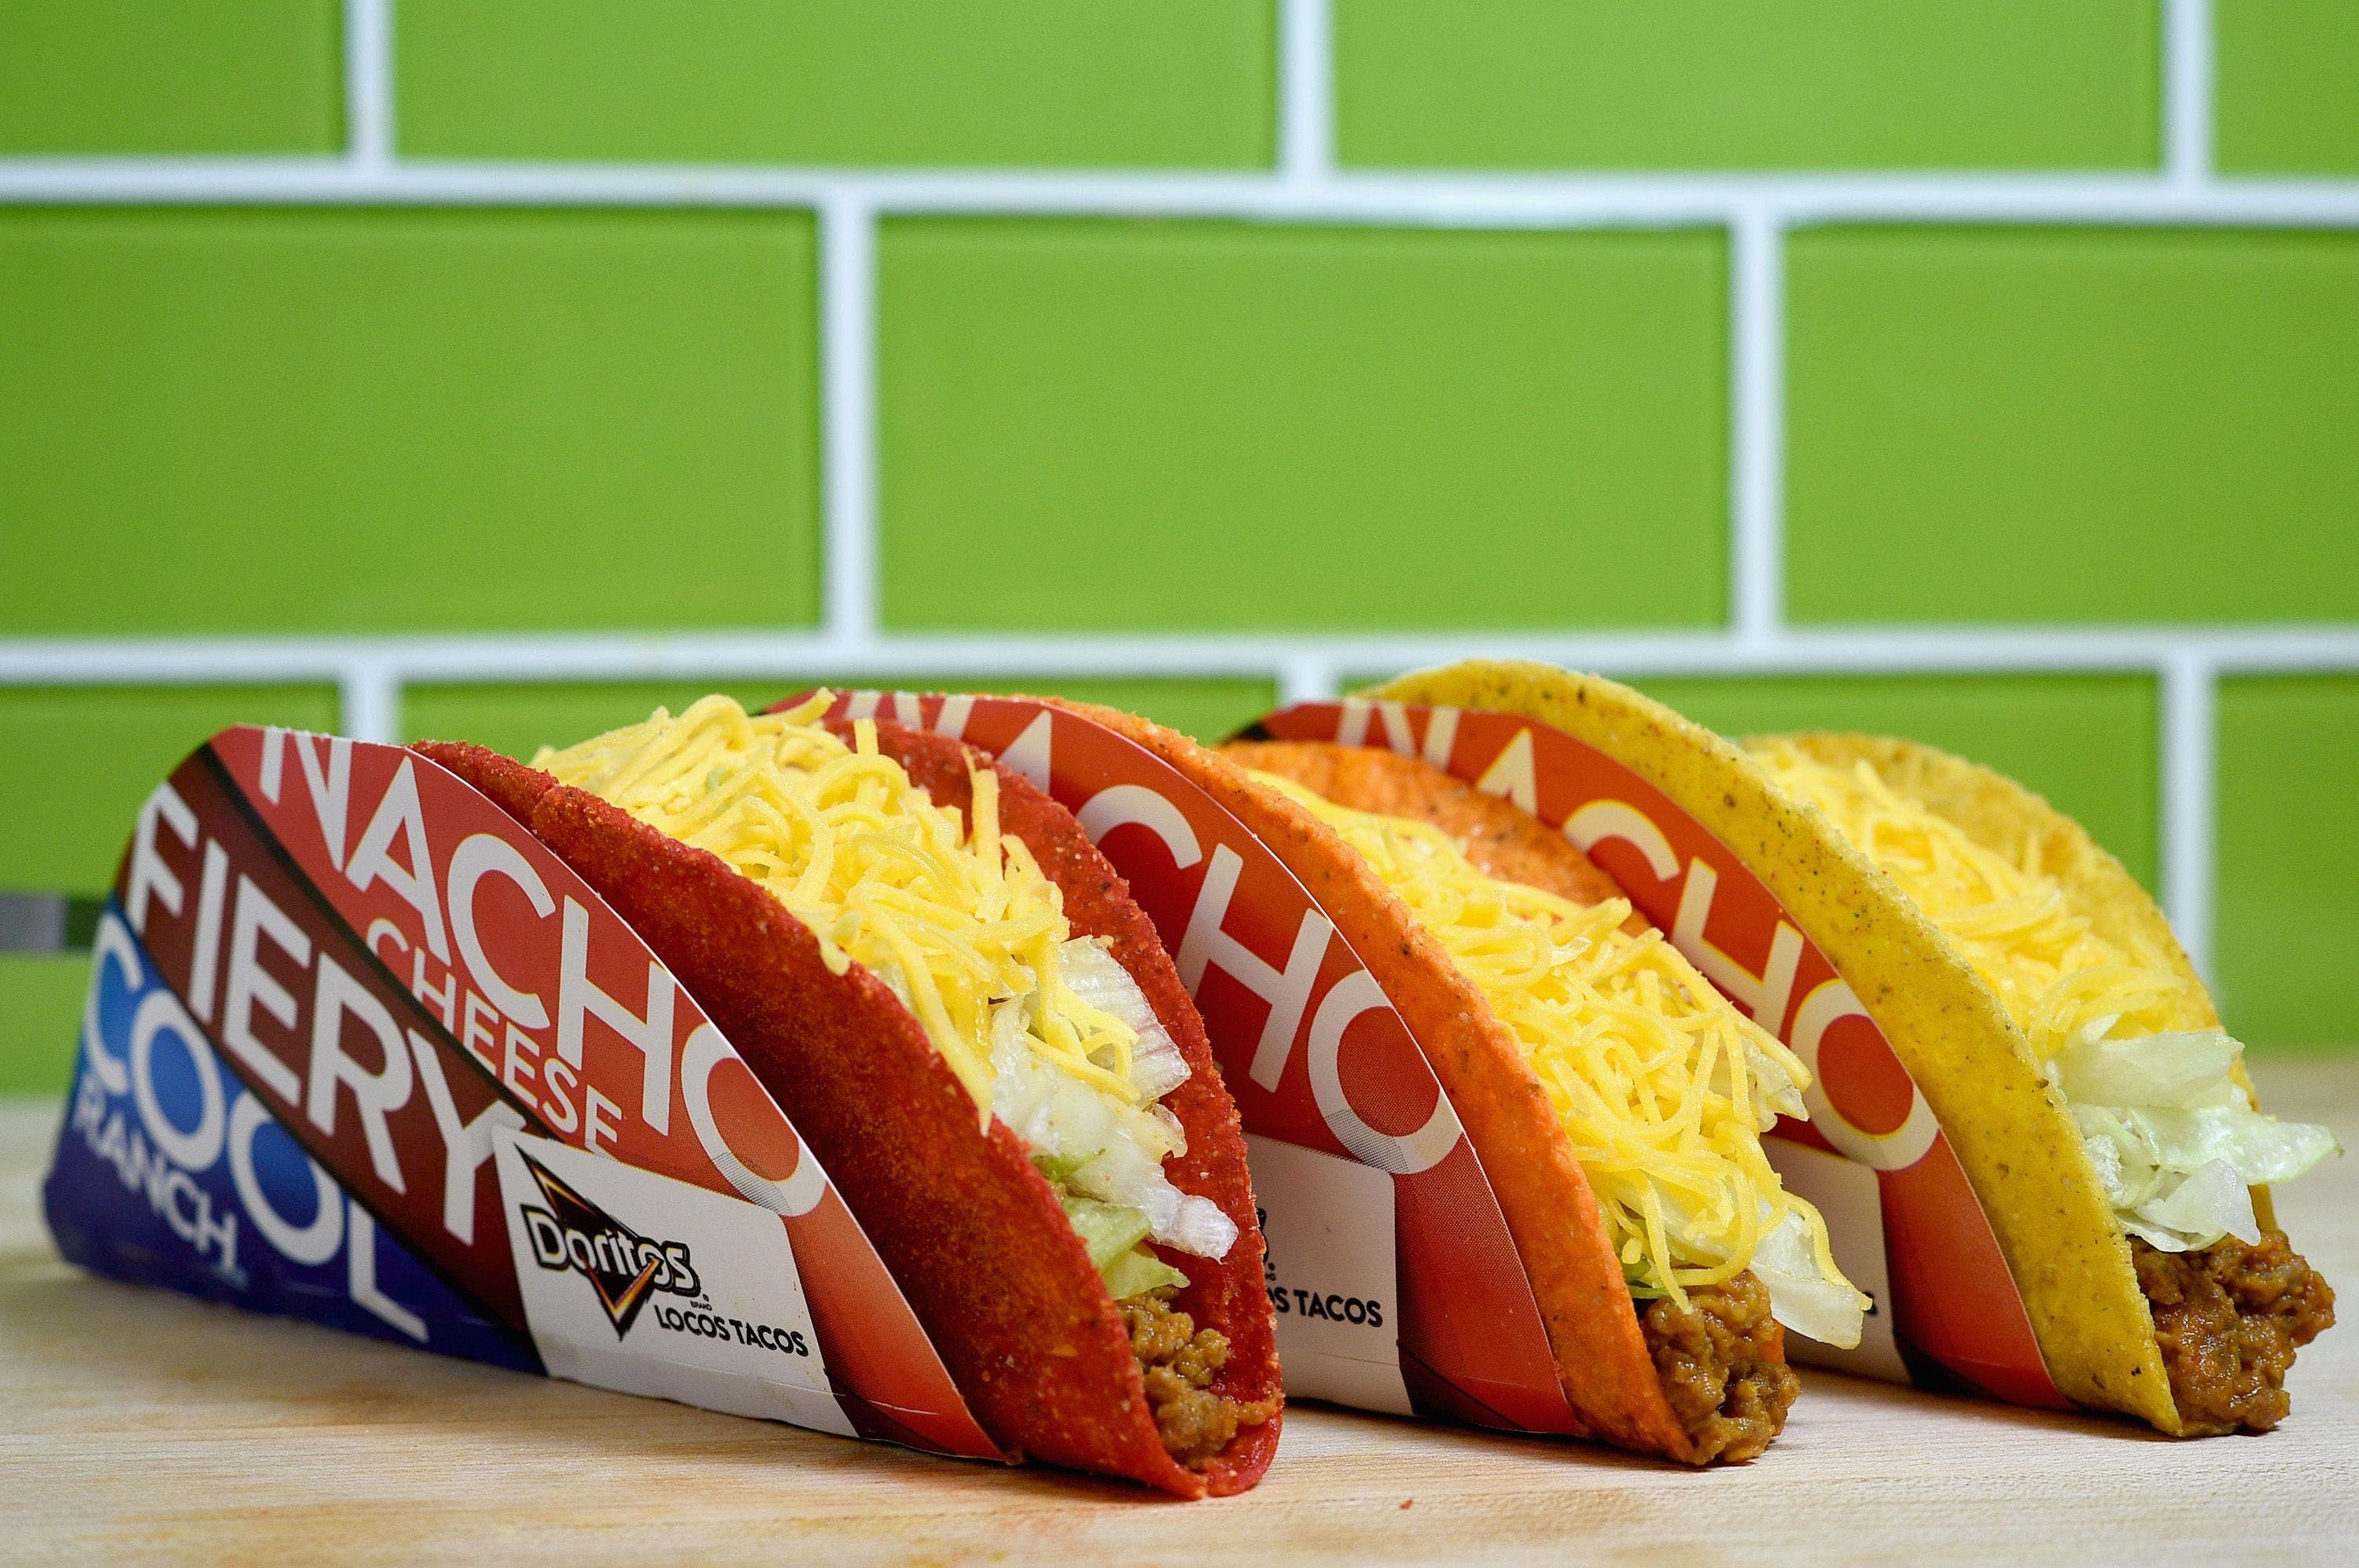 $5 A Month For A Free Daily Taco Bell Taco? Offer Could Come To Customers Soon With Arizona Test